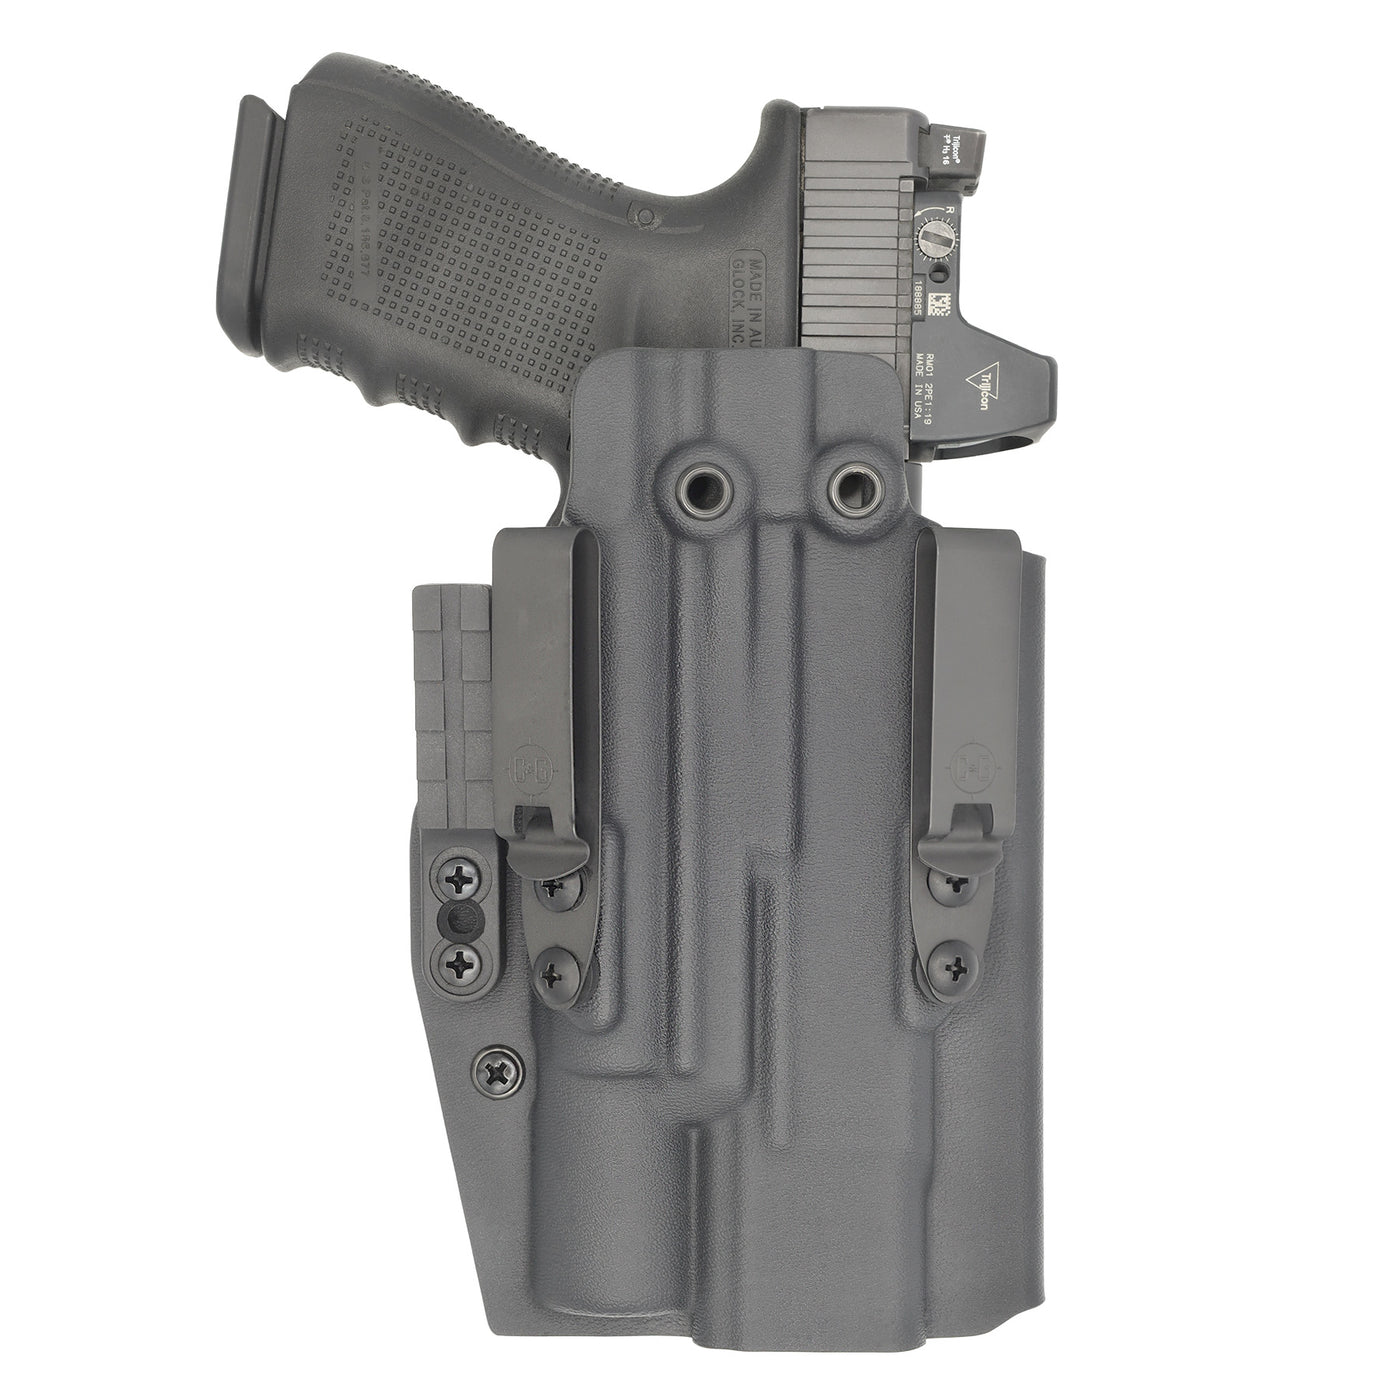 C&G Holsters Quickship IWB ALPHA UPGRADE Tactical Glock Surefire X300 in holstered position